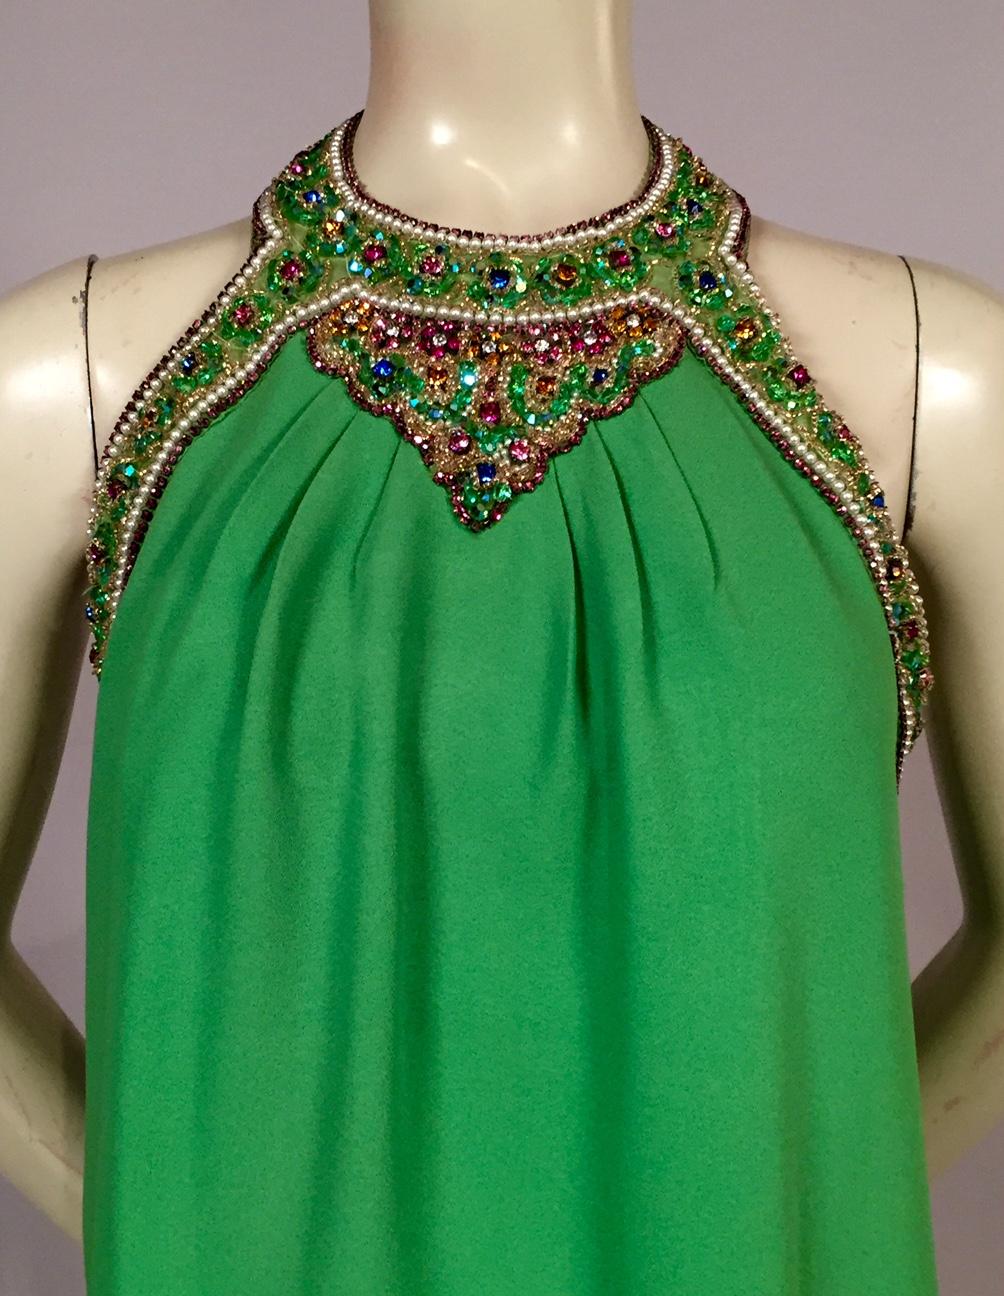 Bob Bugnand has used the most spectacular jewels to decorate the halter neckline of this bright green crepe evening dress. Pearls and prong set pink beads are used to trim all of the edges. A rainbow mix of colors and beads fills every speck of